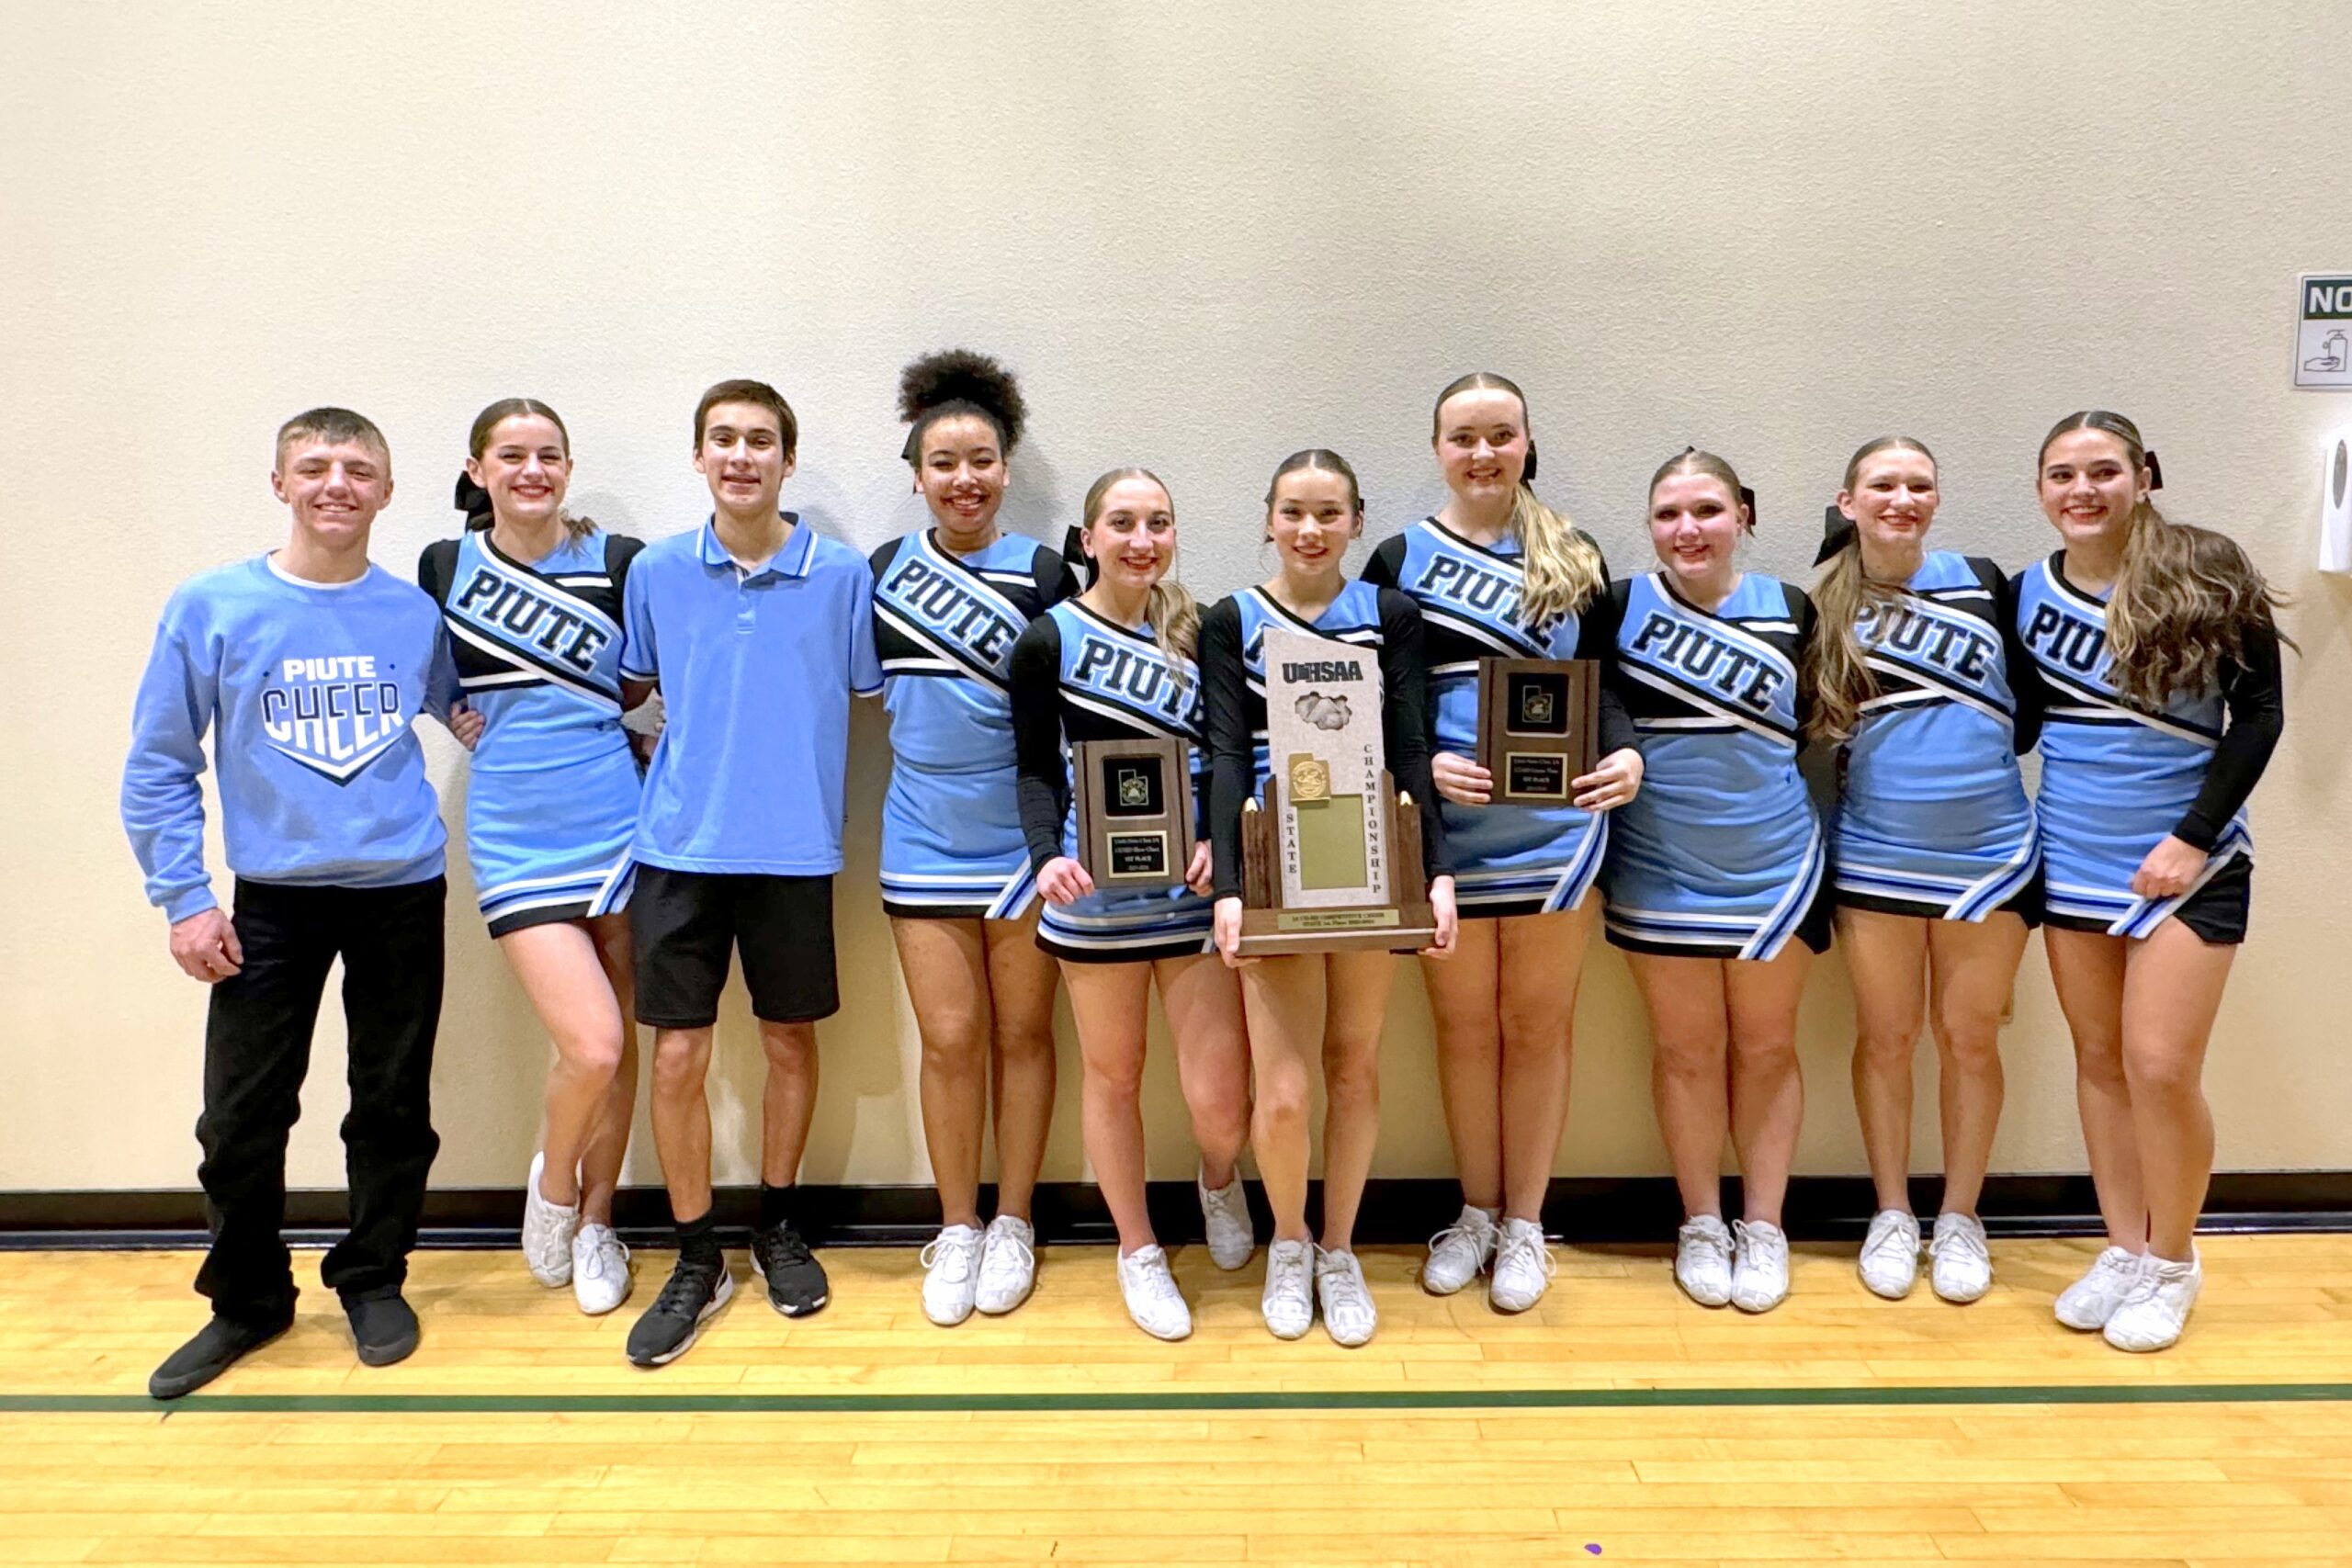 The Piute cheer team with their state championship trophy.